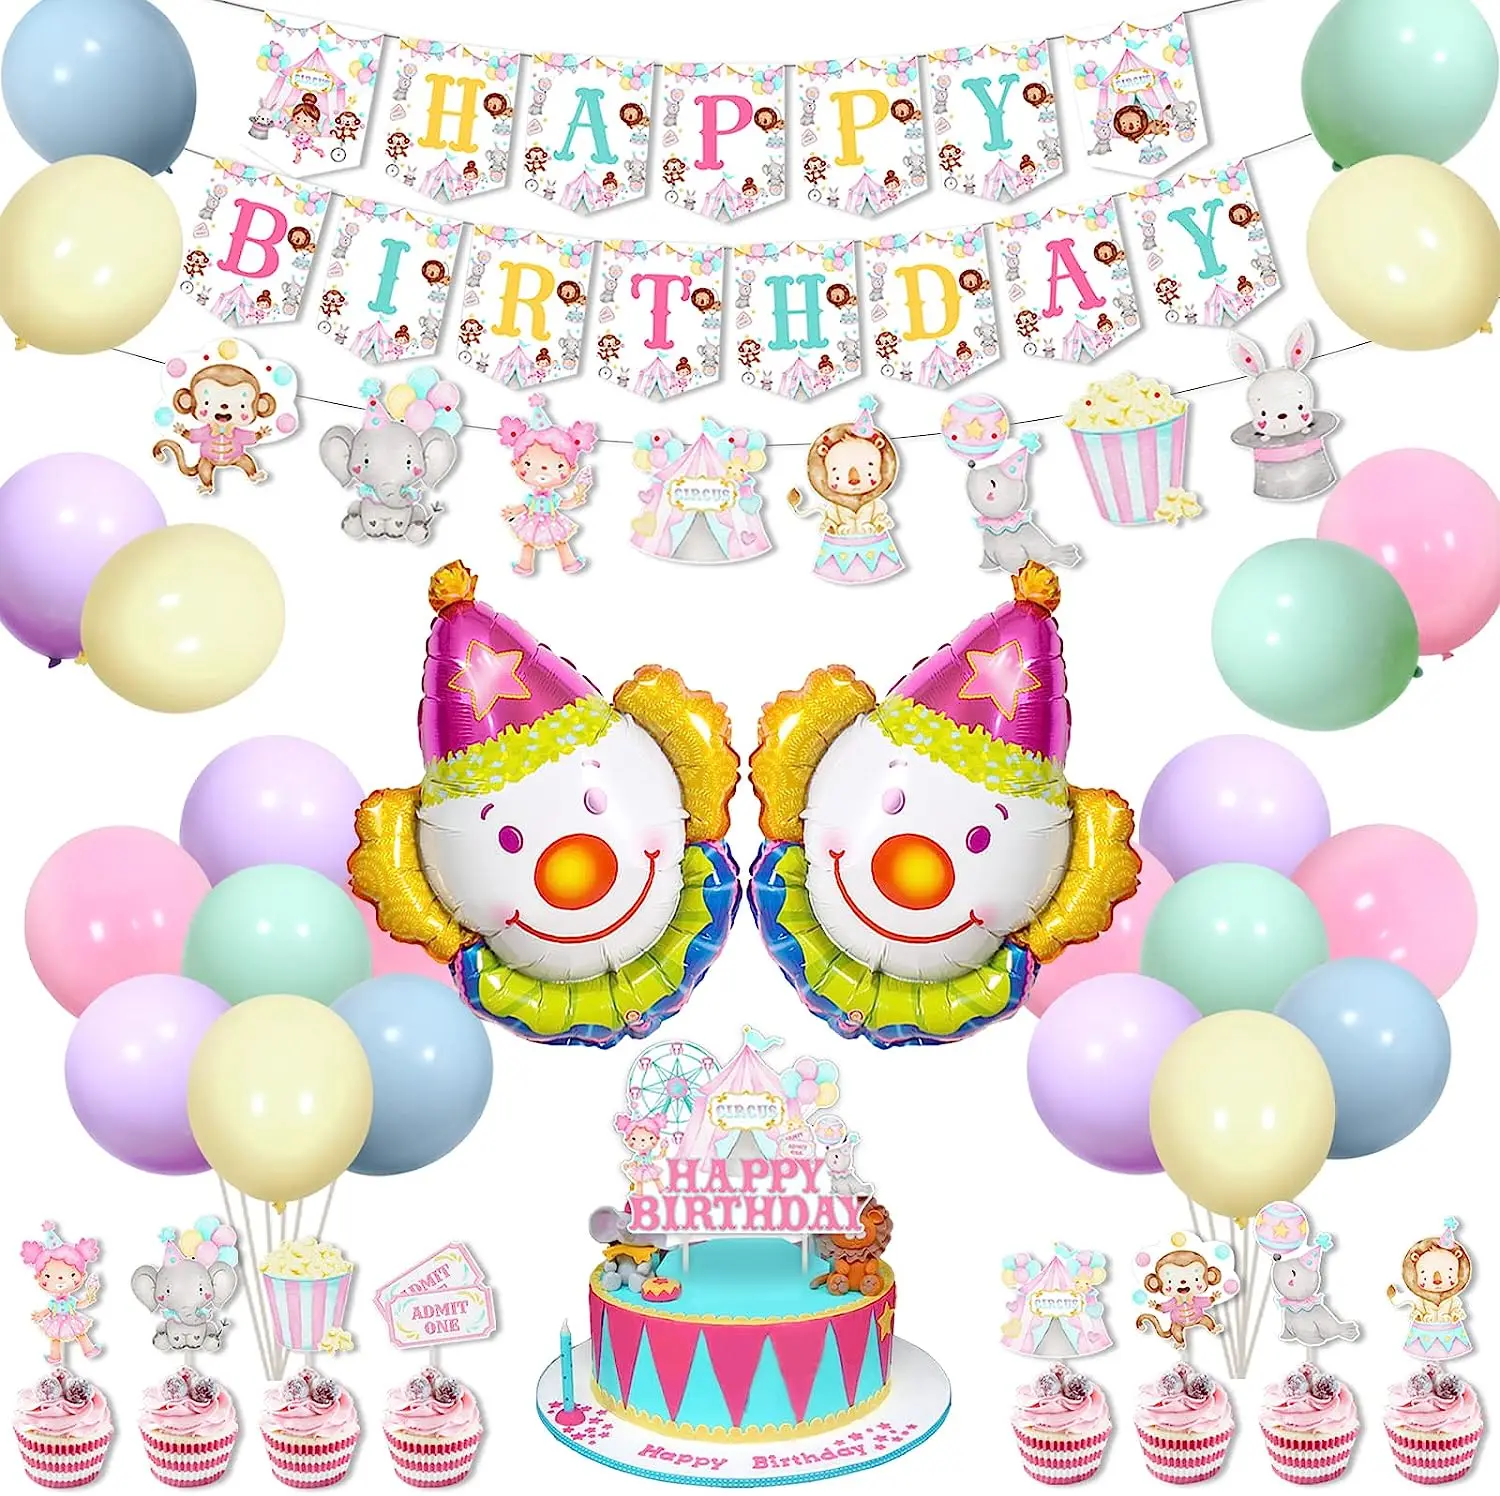 

Pink Circus Theme Birthday Party Decorations, Pastel Macaron, Happy Birthday Banner, Cake Topper, Clown Balloons, Party Supplies